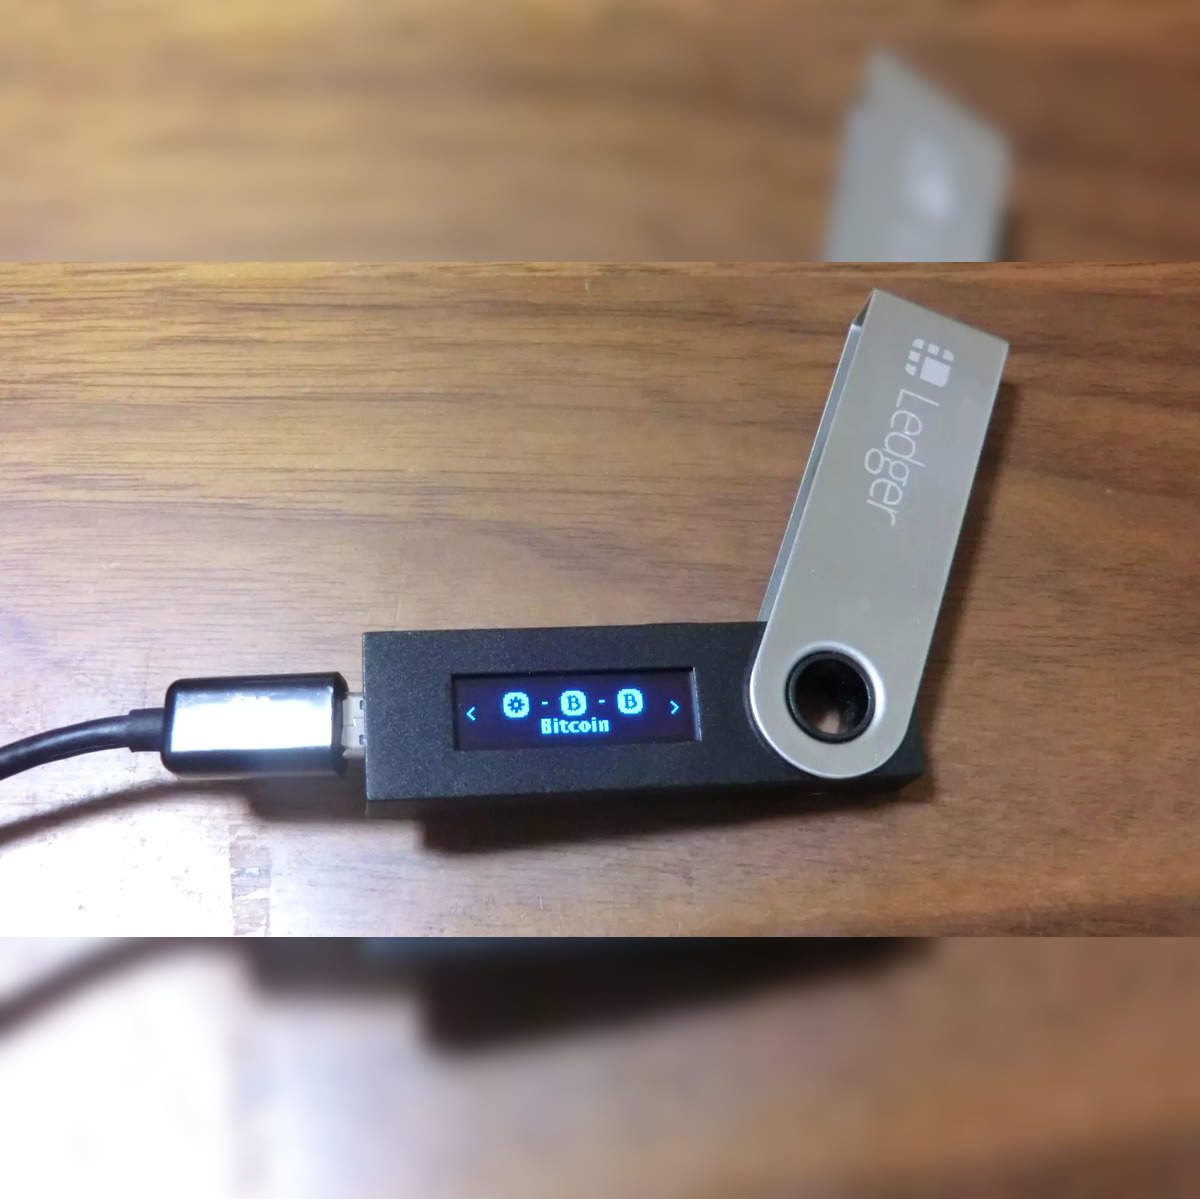 ledger: Why has hardware wallet manufacturer 'Ledger' warned users not to  connect to any dApps - The Economic Times